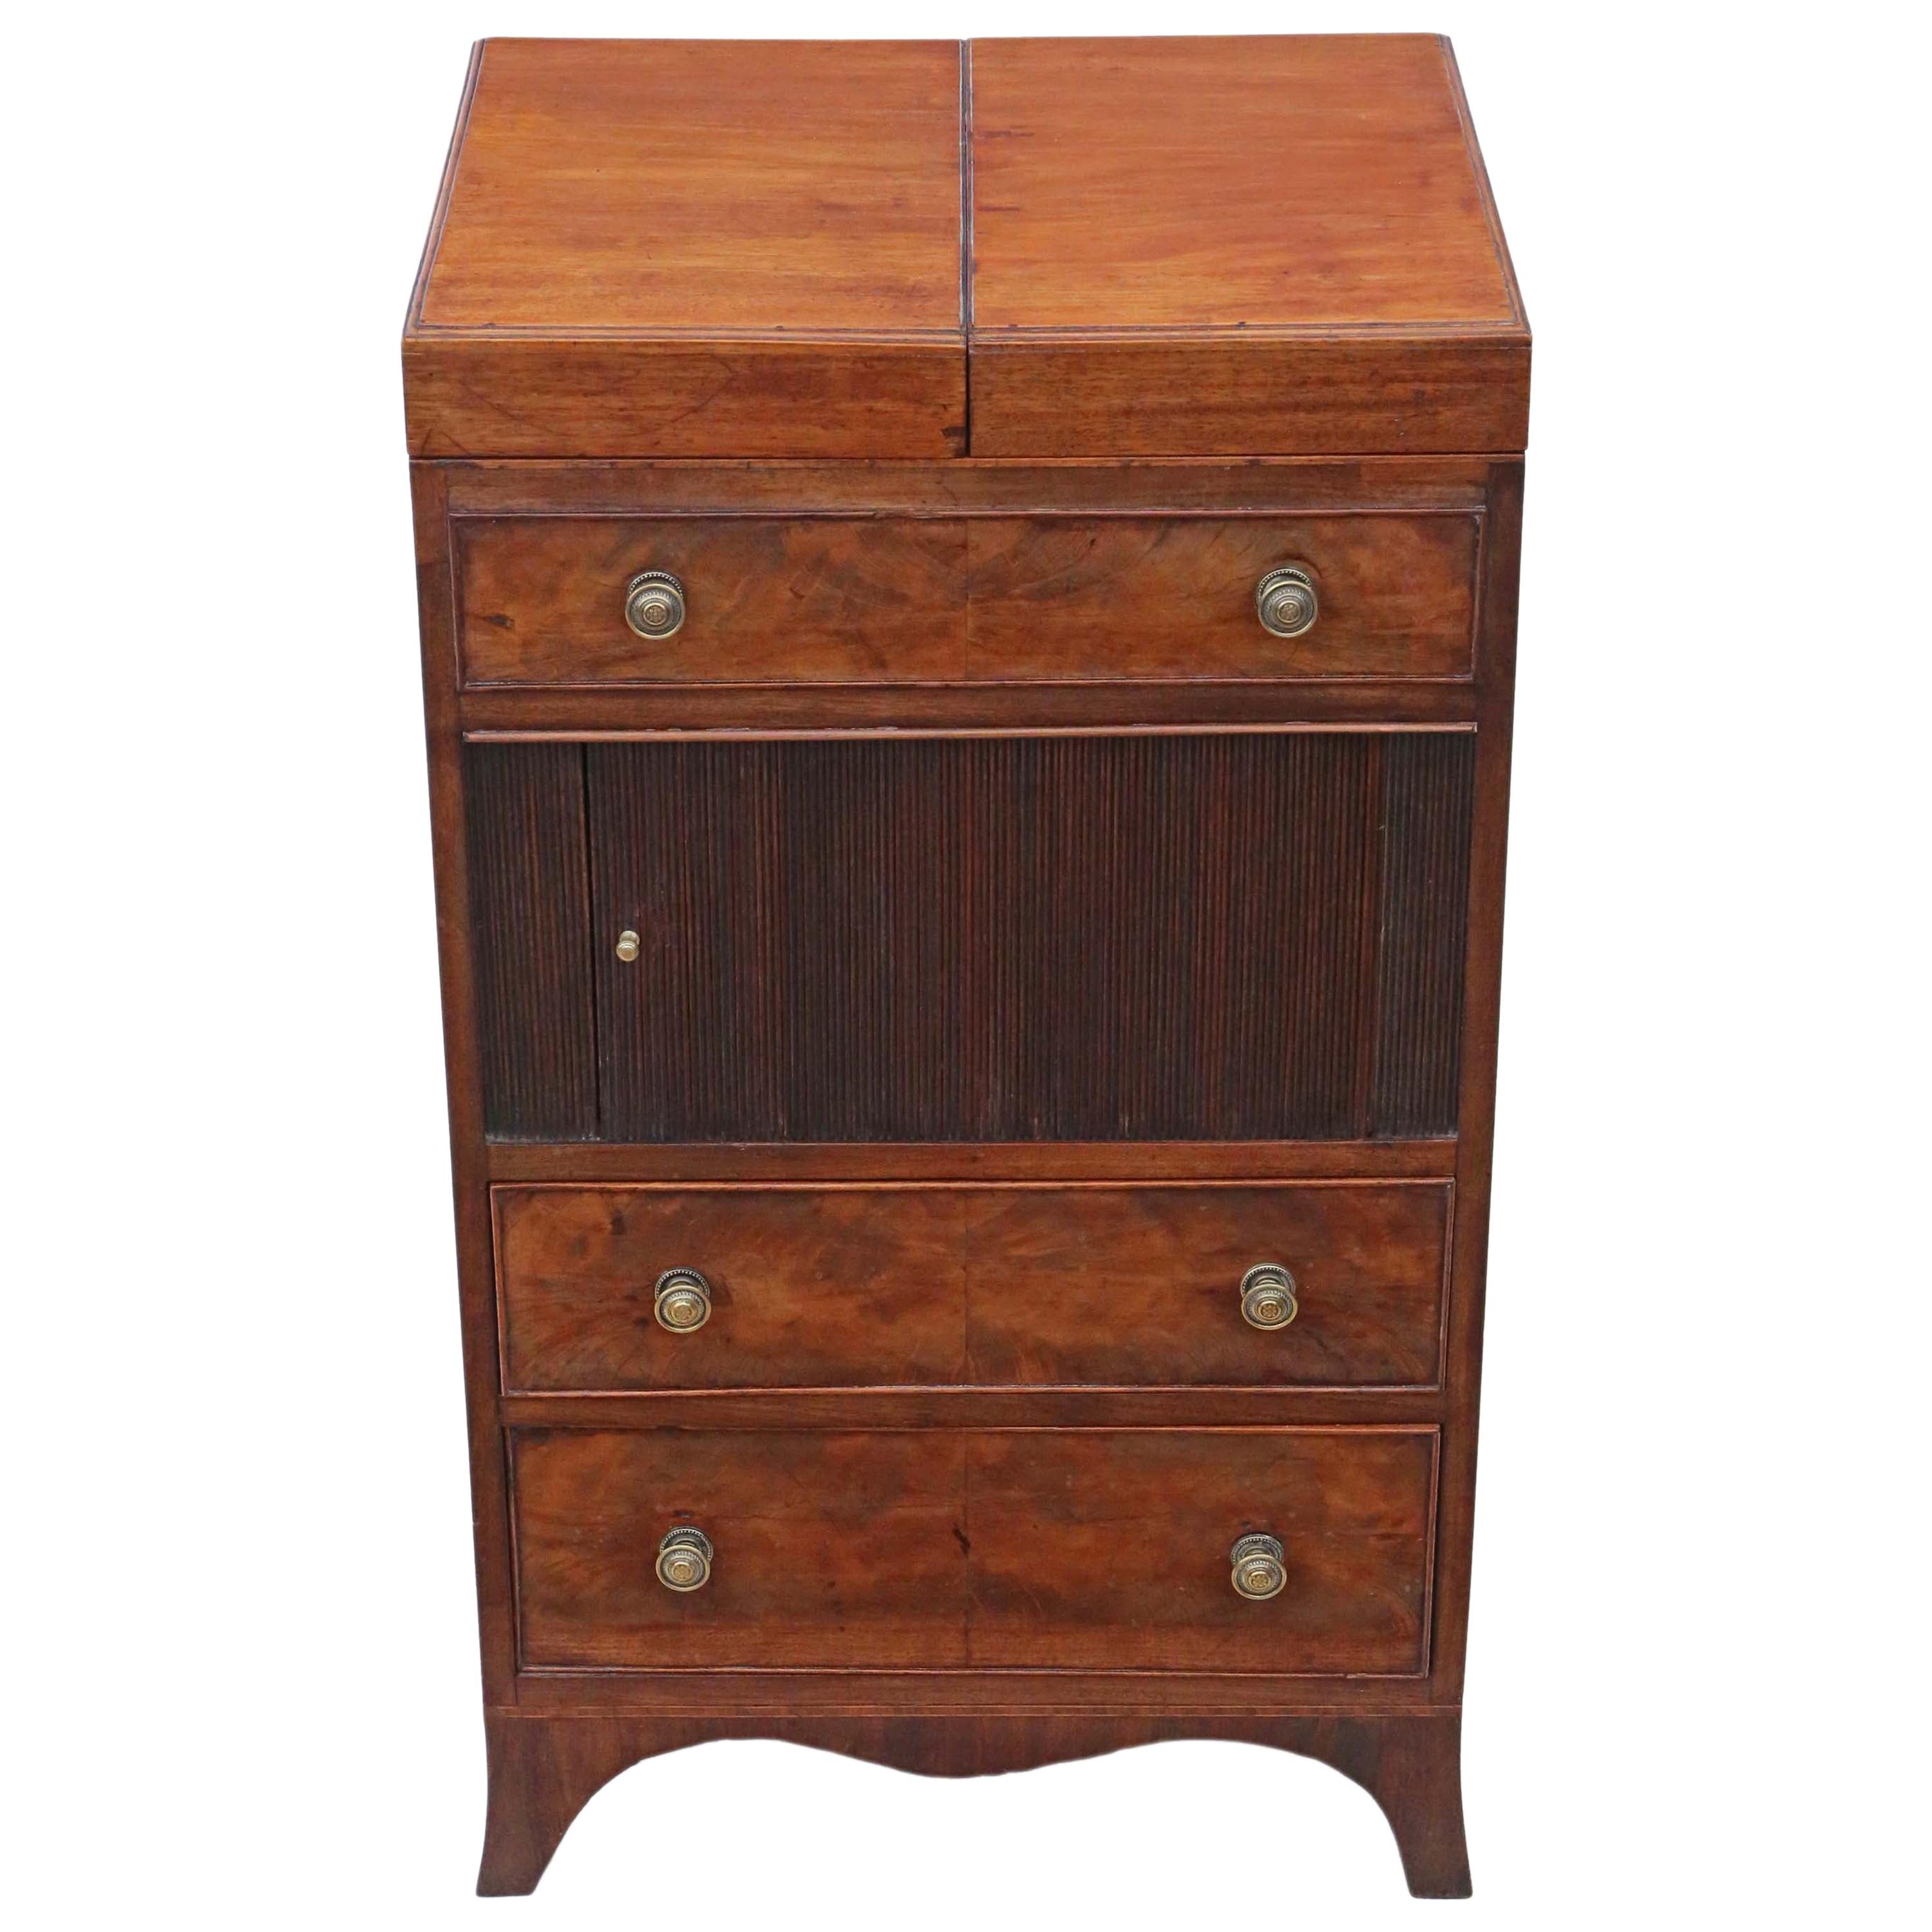 Antique Large Flame Mahogany Washstand Bedside Table, C1800, Georgian